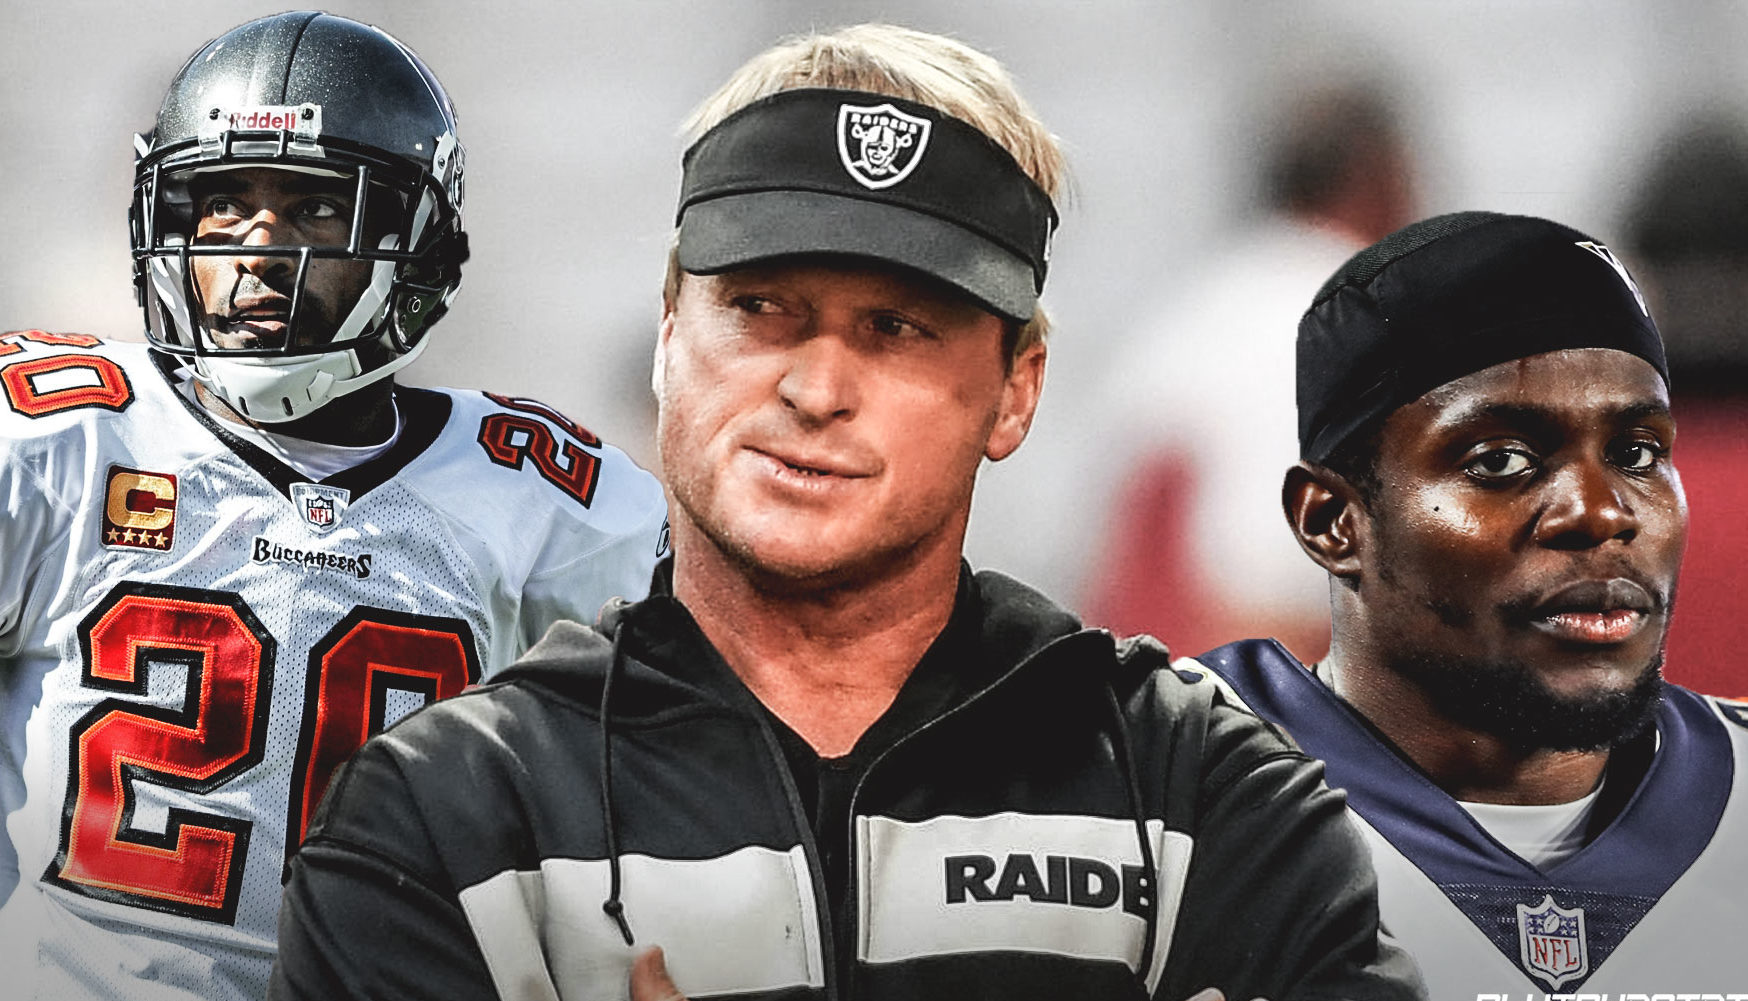 Gruden forced to quit following racist emails